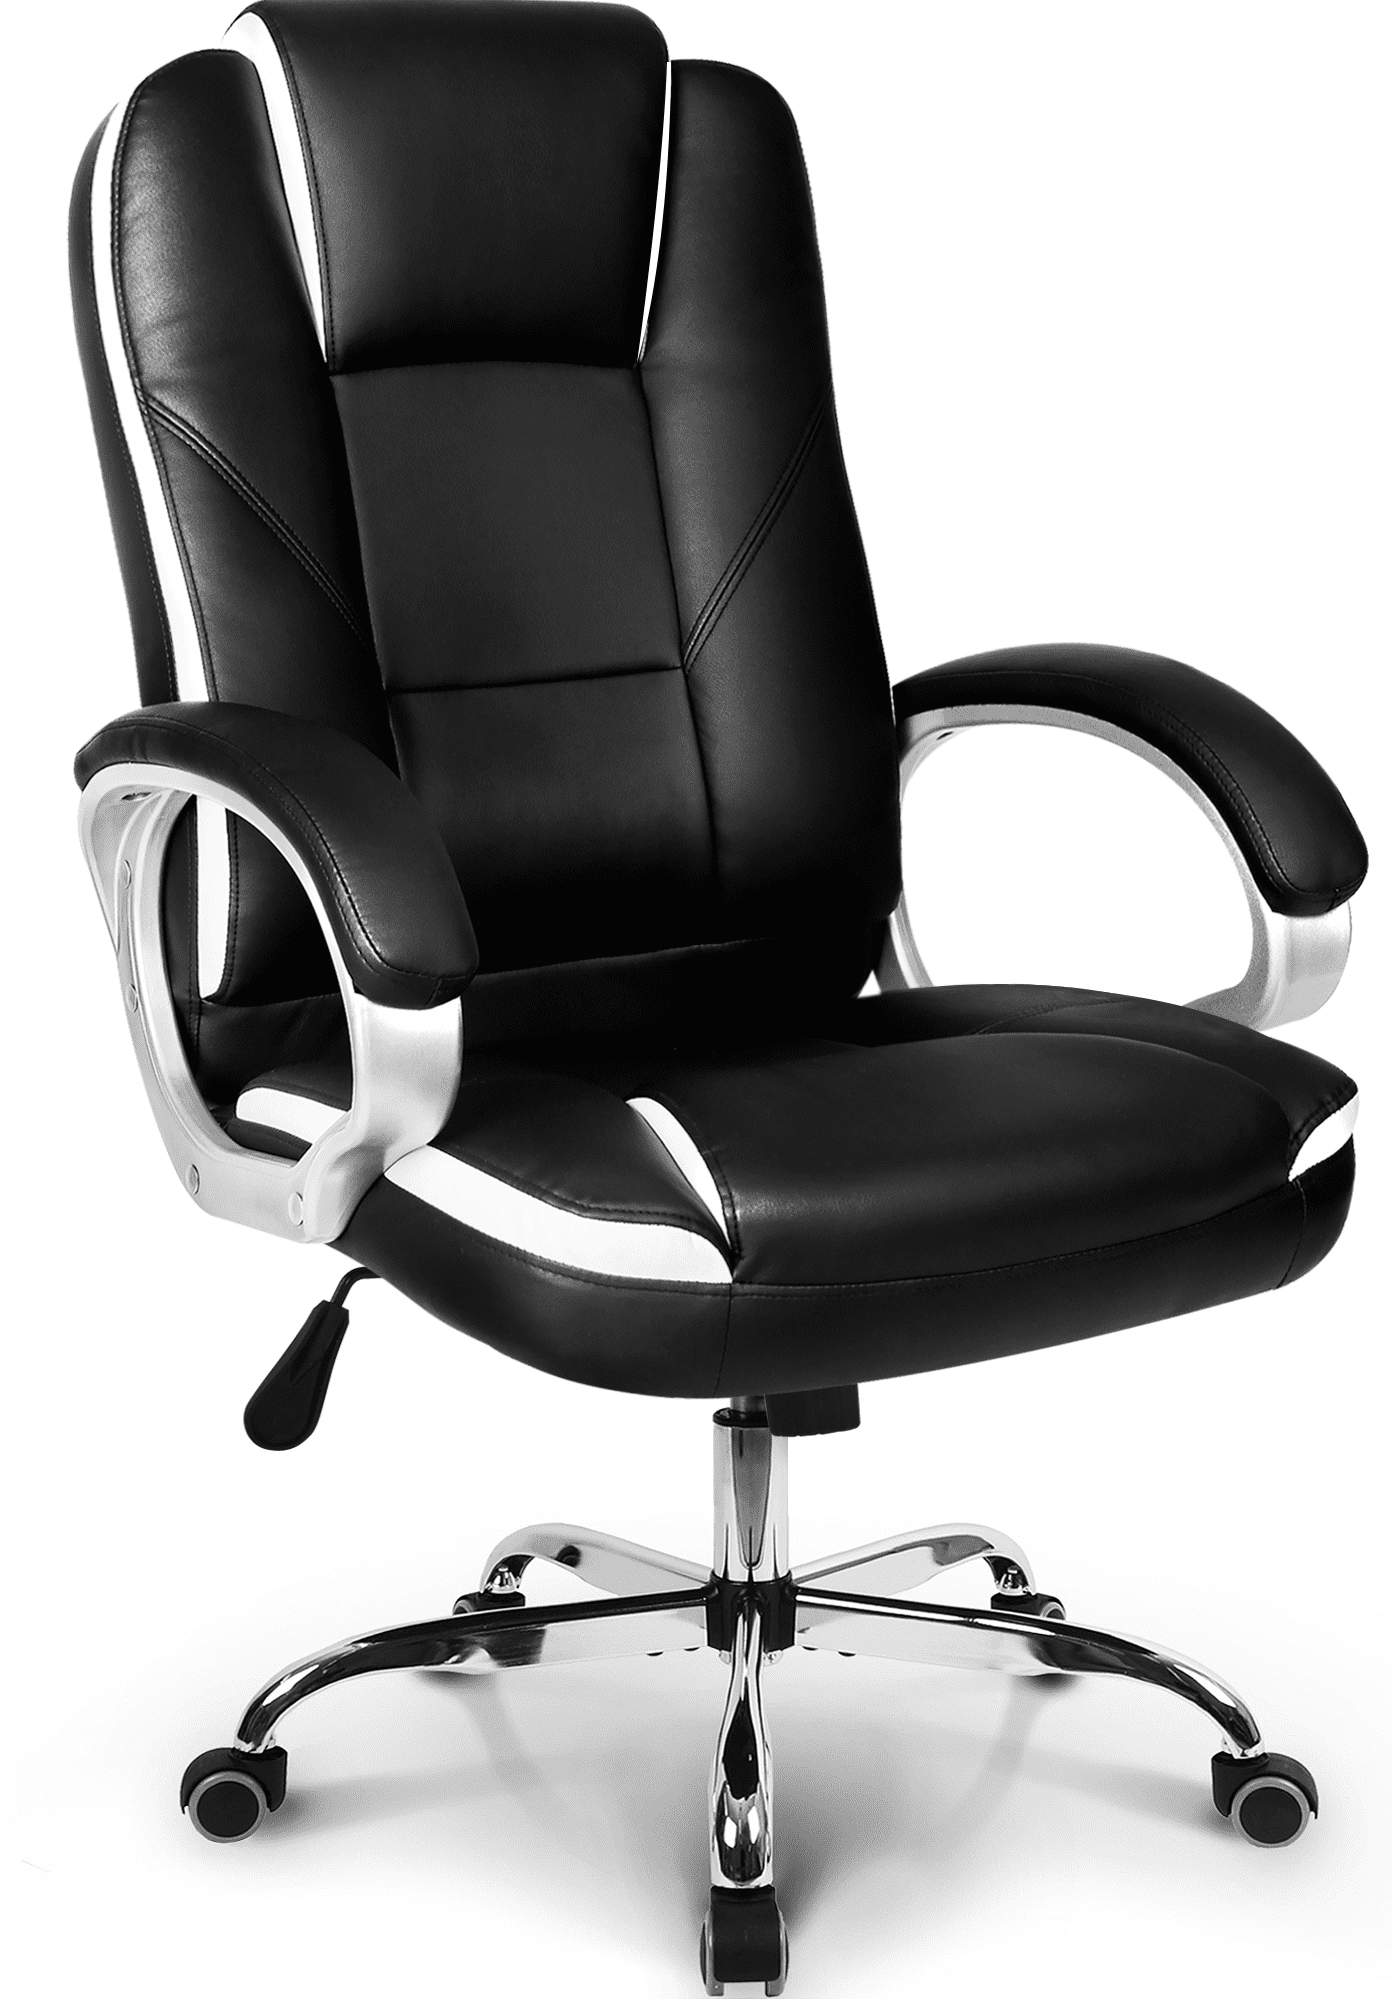 Neo Chair Ergonomic High Back Executive Leather Office Computer Desk Chair,  Black 